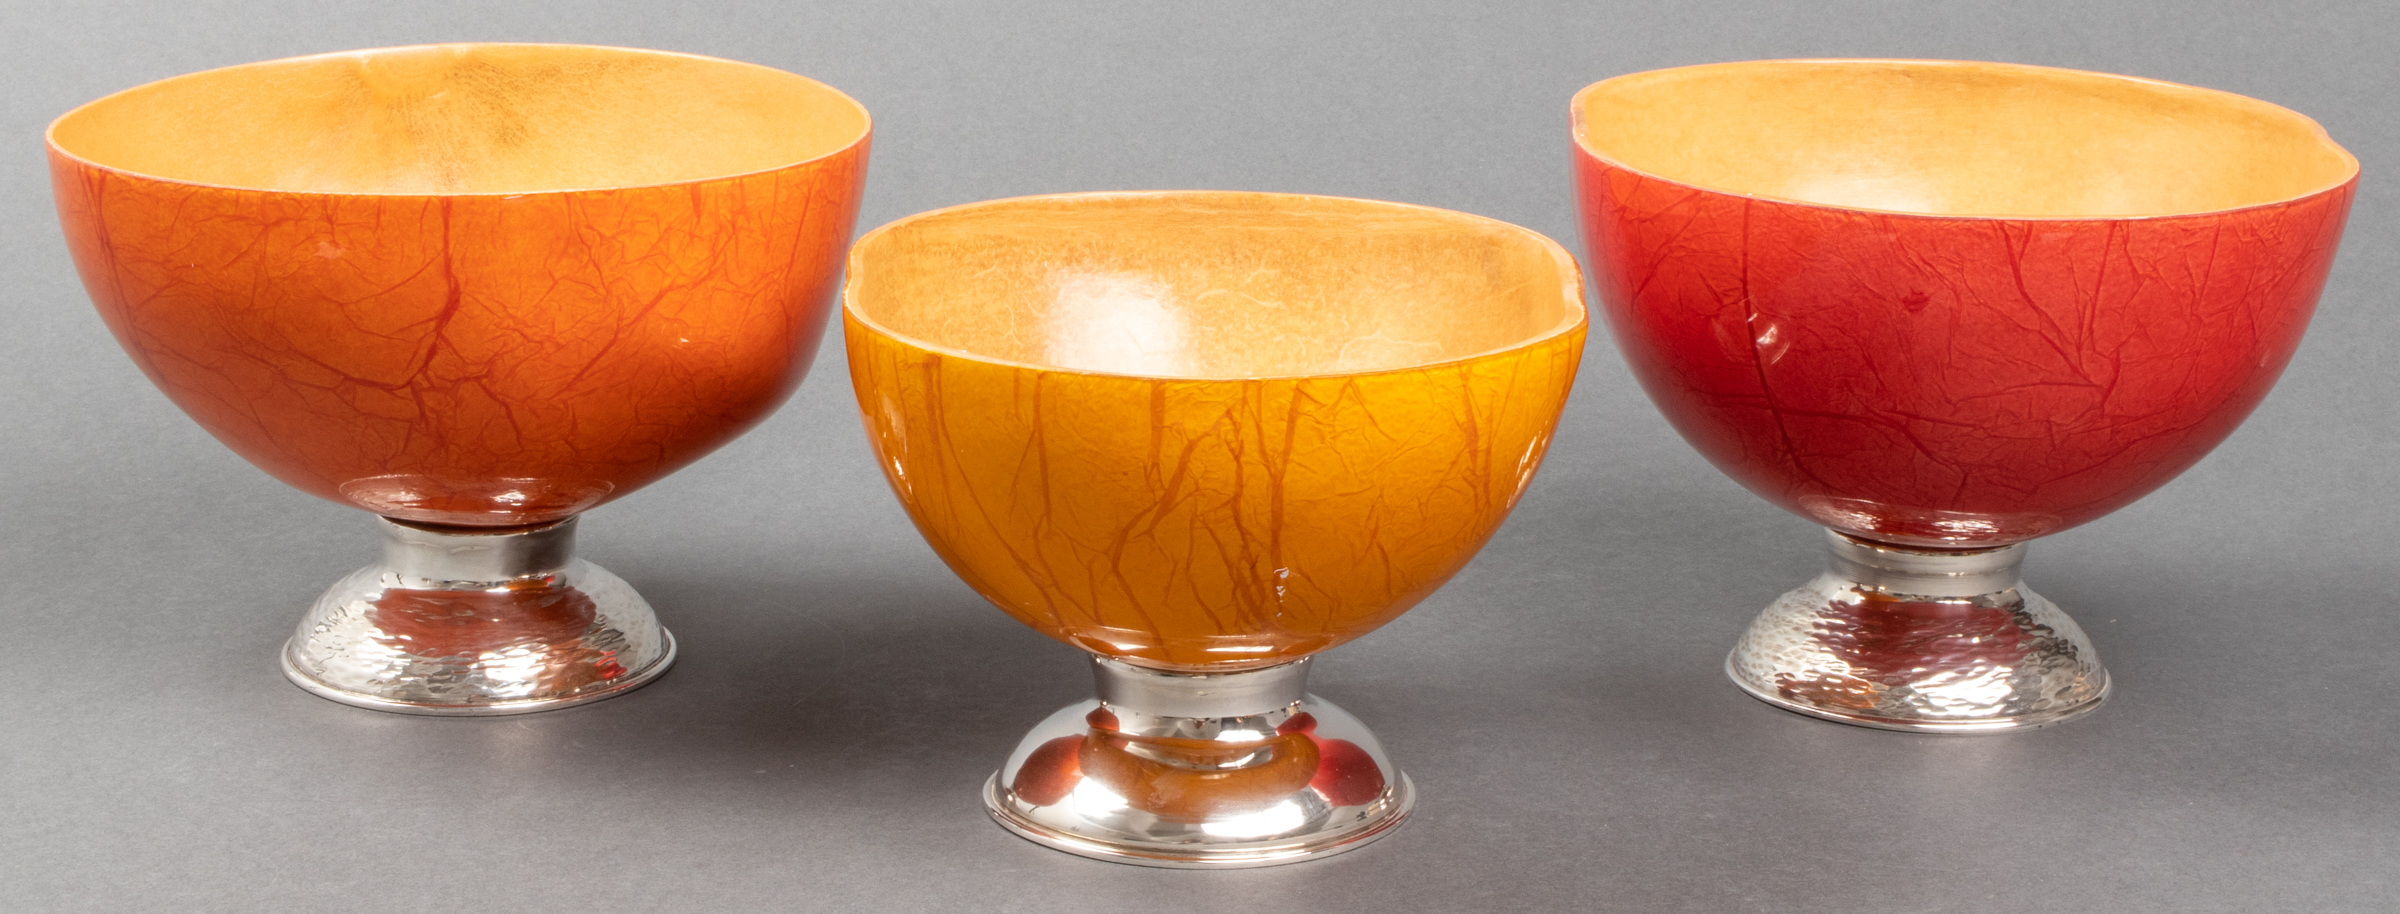 ARGENTA LACQUERED BOWLS ON SILVER 3c3cd7